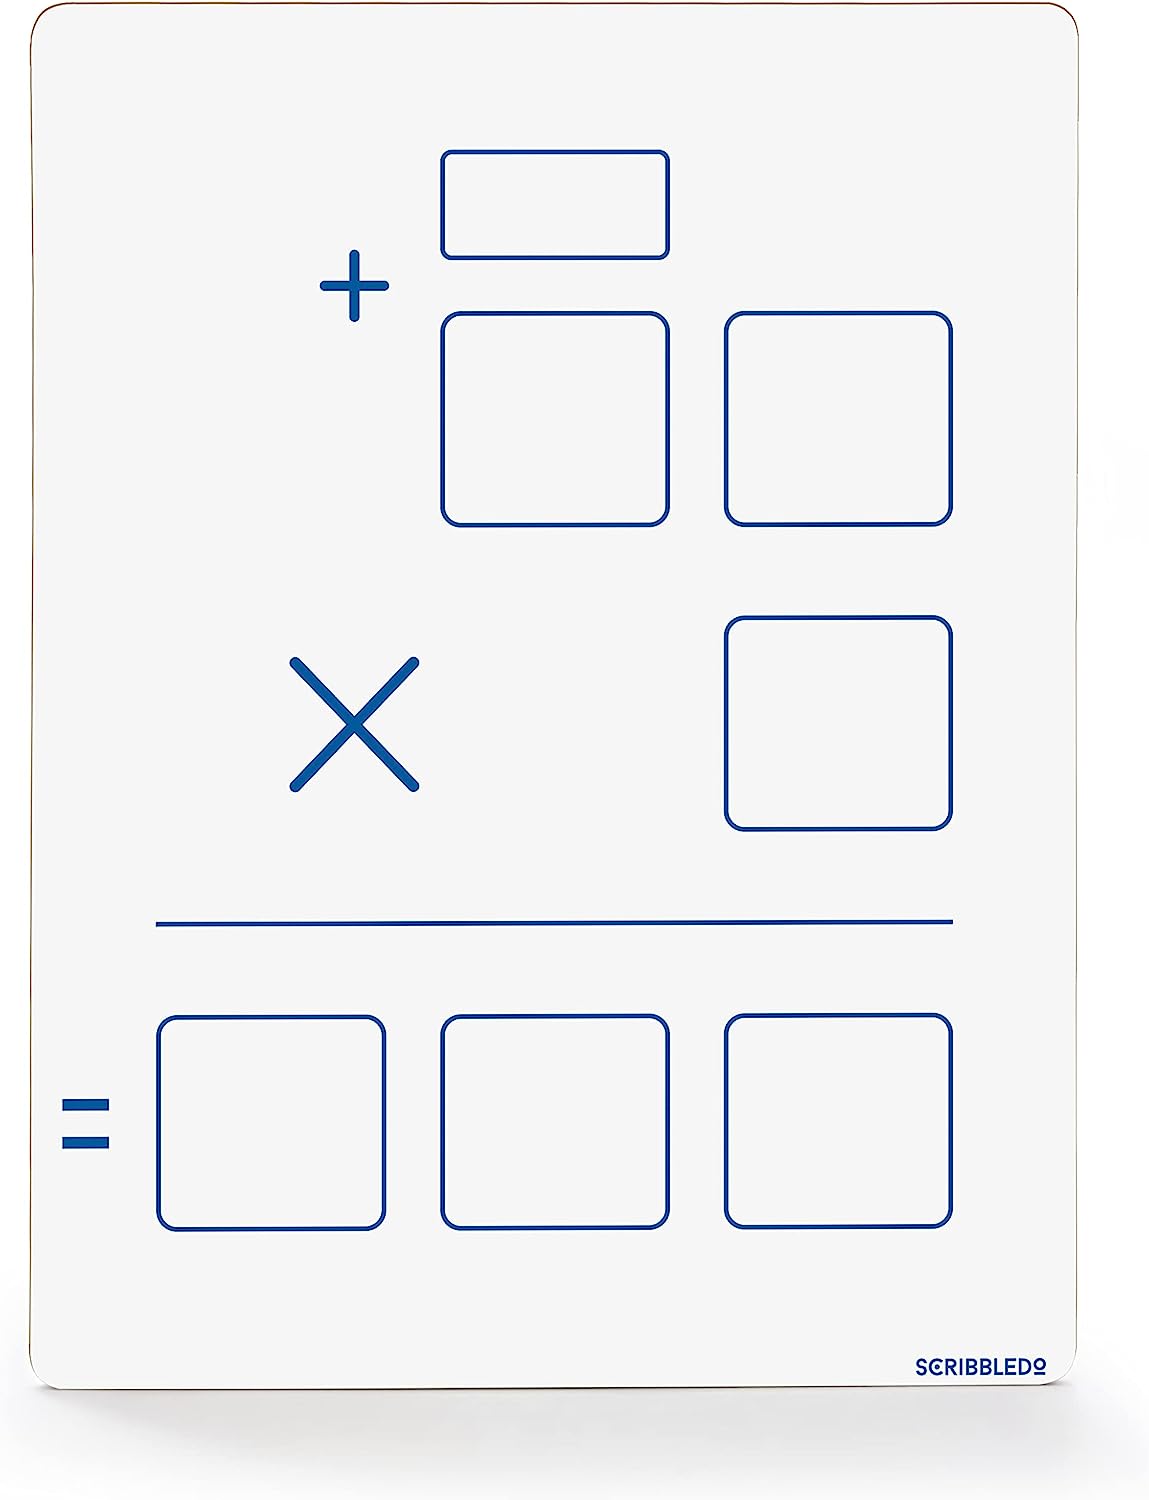 multiplication board for math problems practice